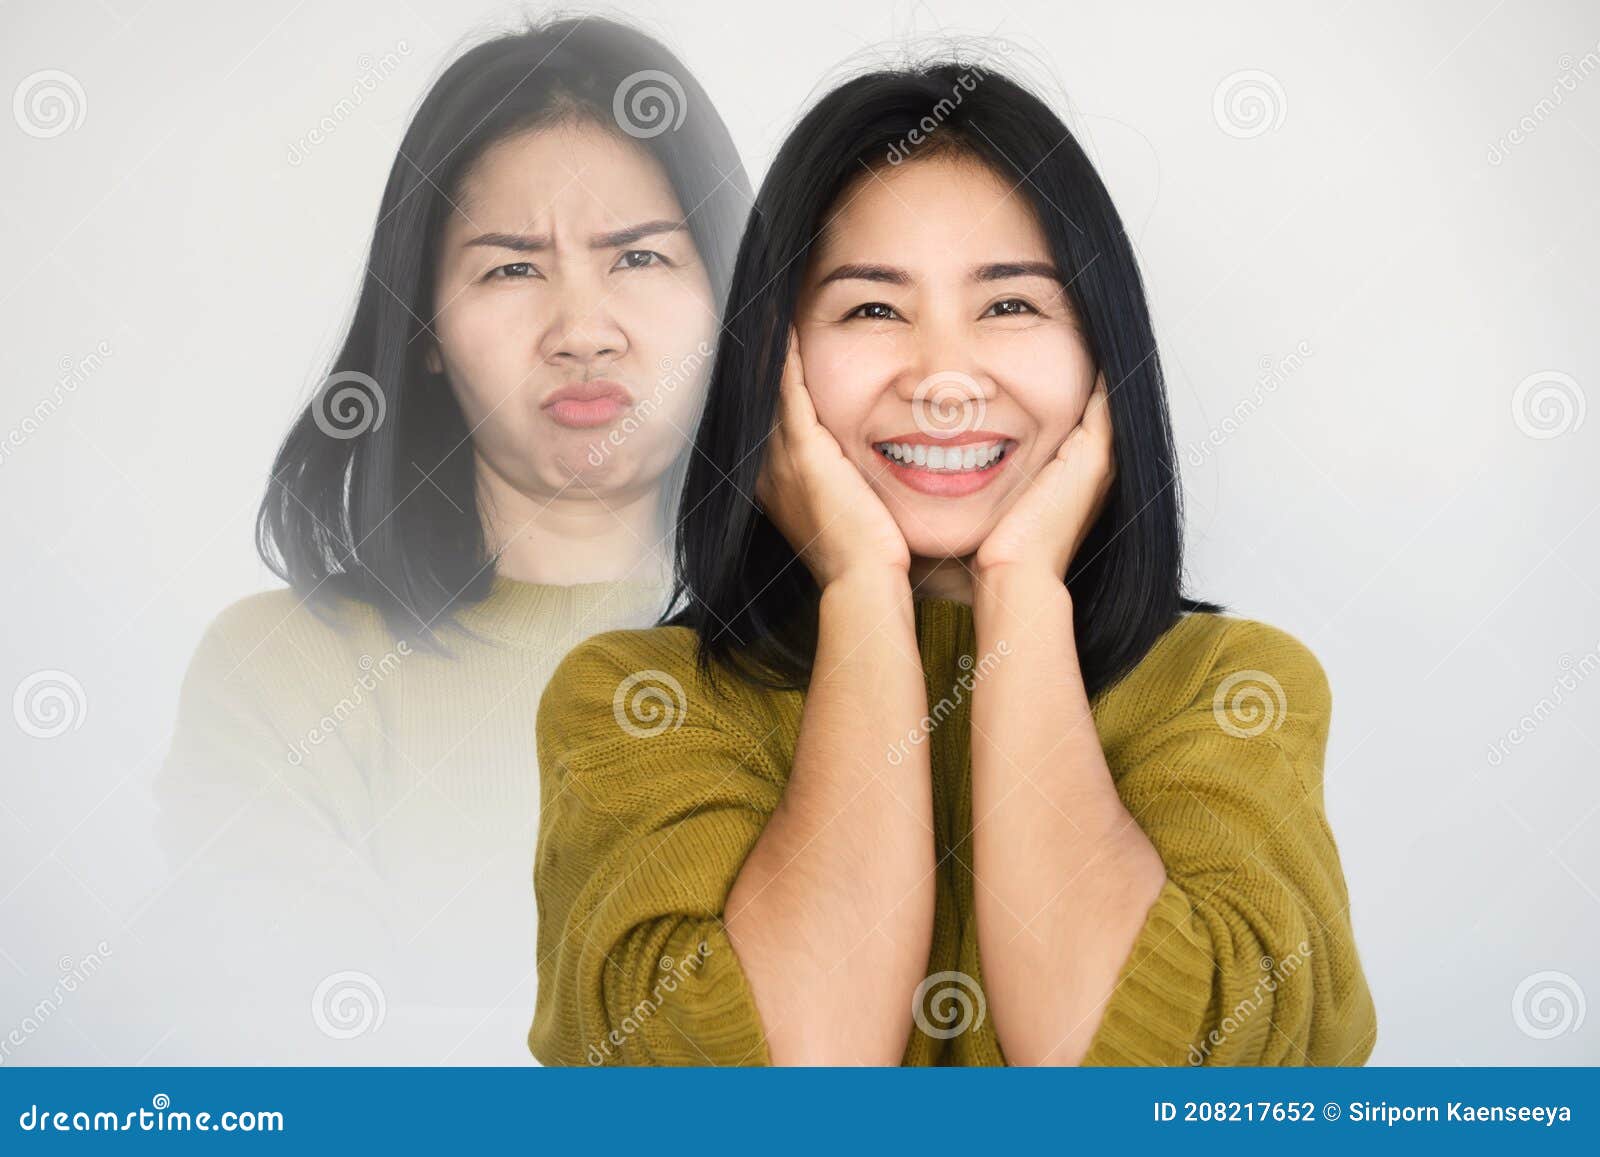 asian woman having double personality ,mood swings or bipolar disorder with different emotions moody, happy face